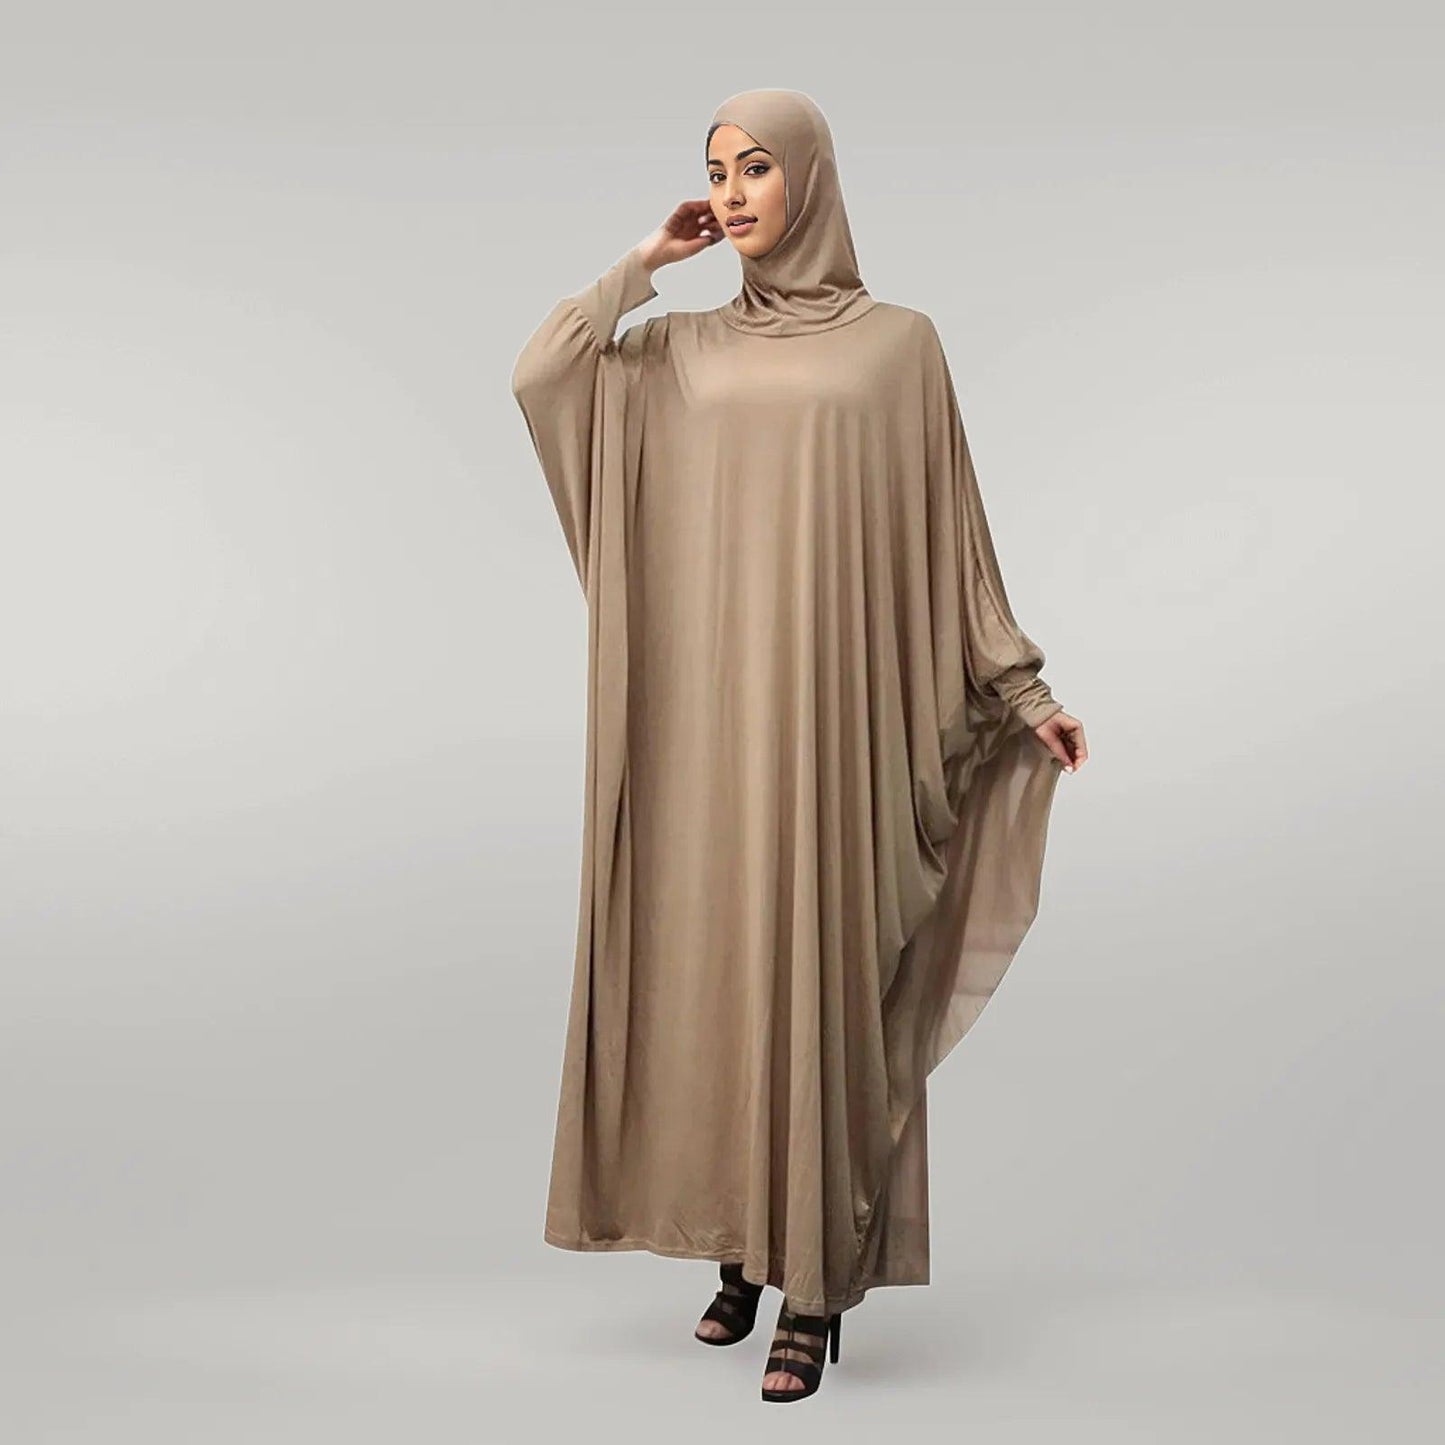 Butterfly Style Abaya in Dark Pink and Light Brown Color